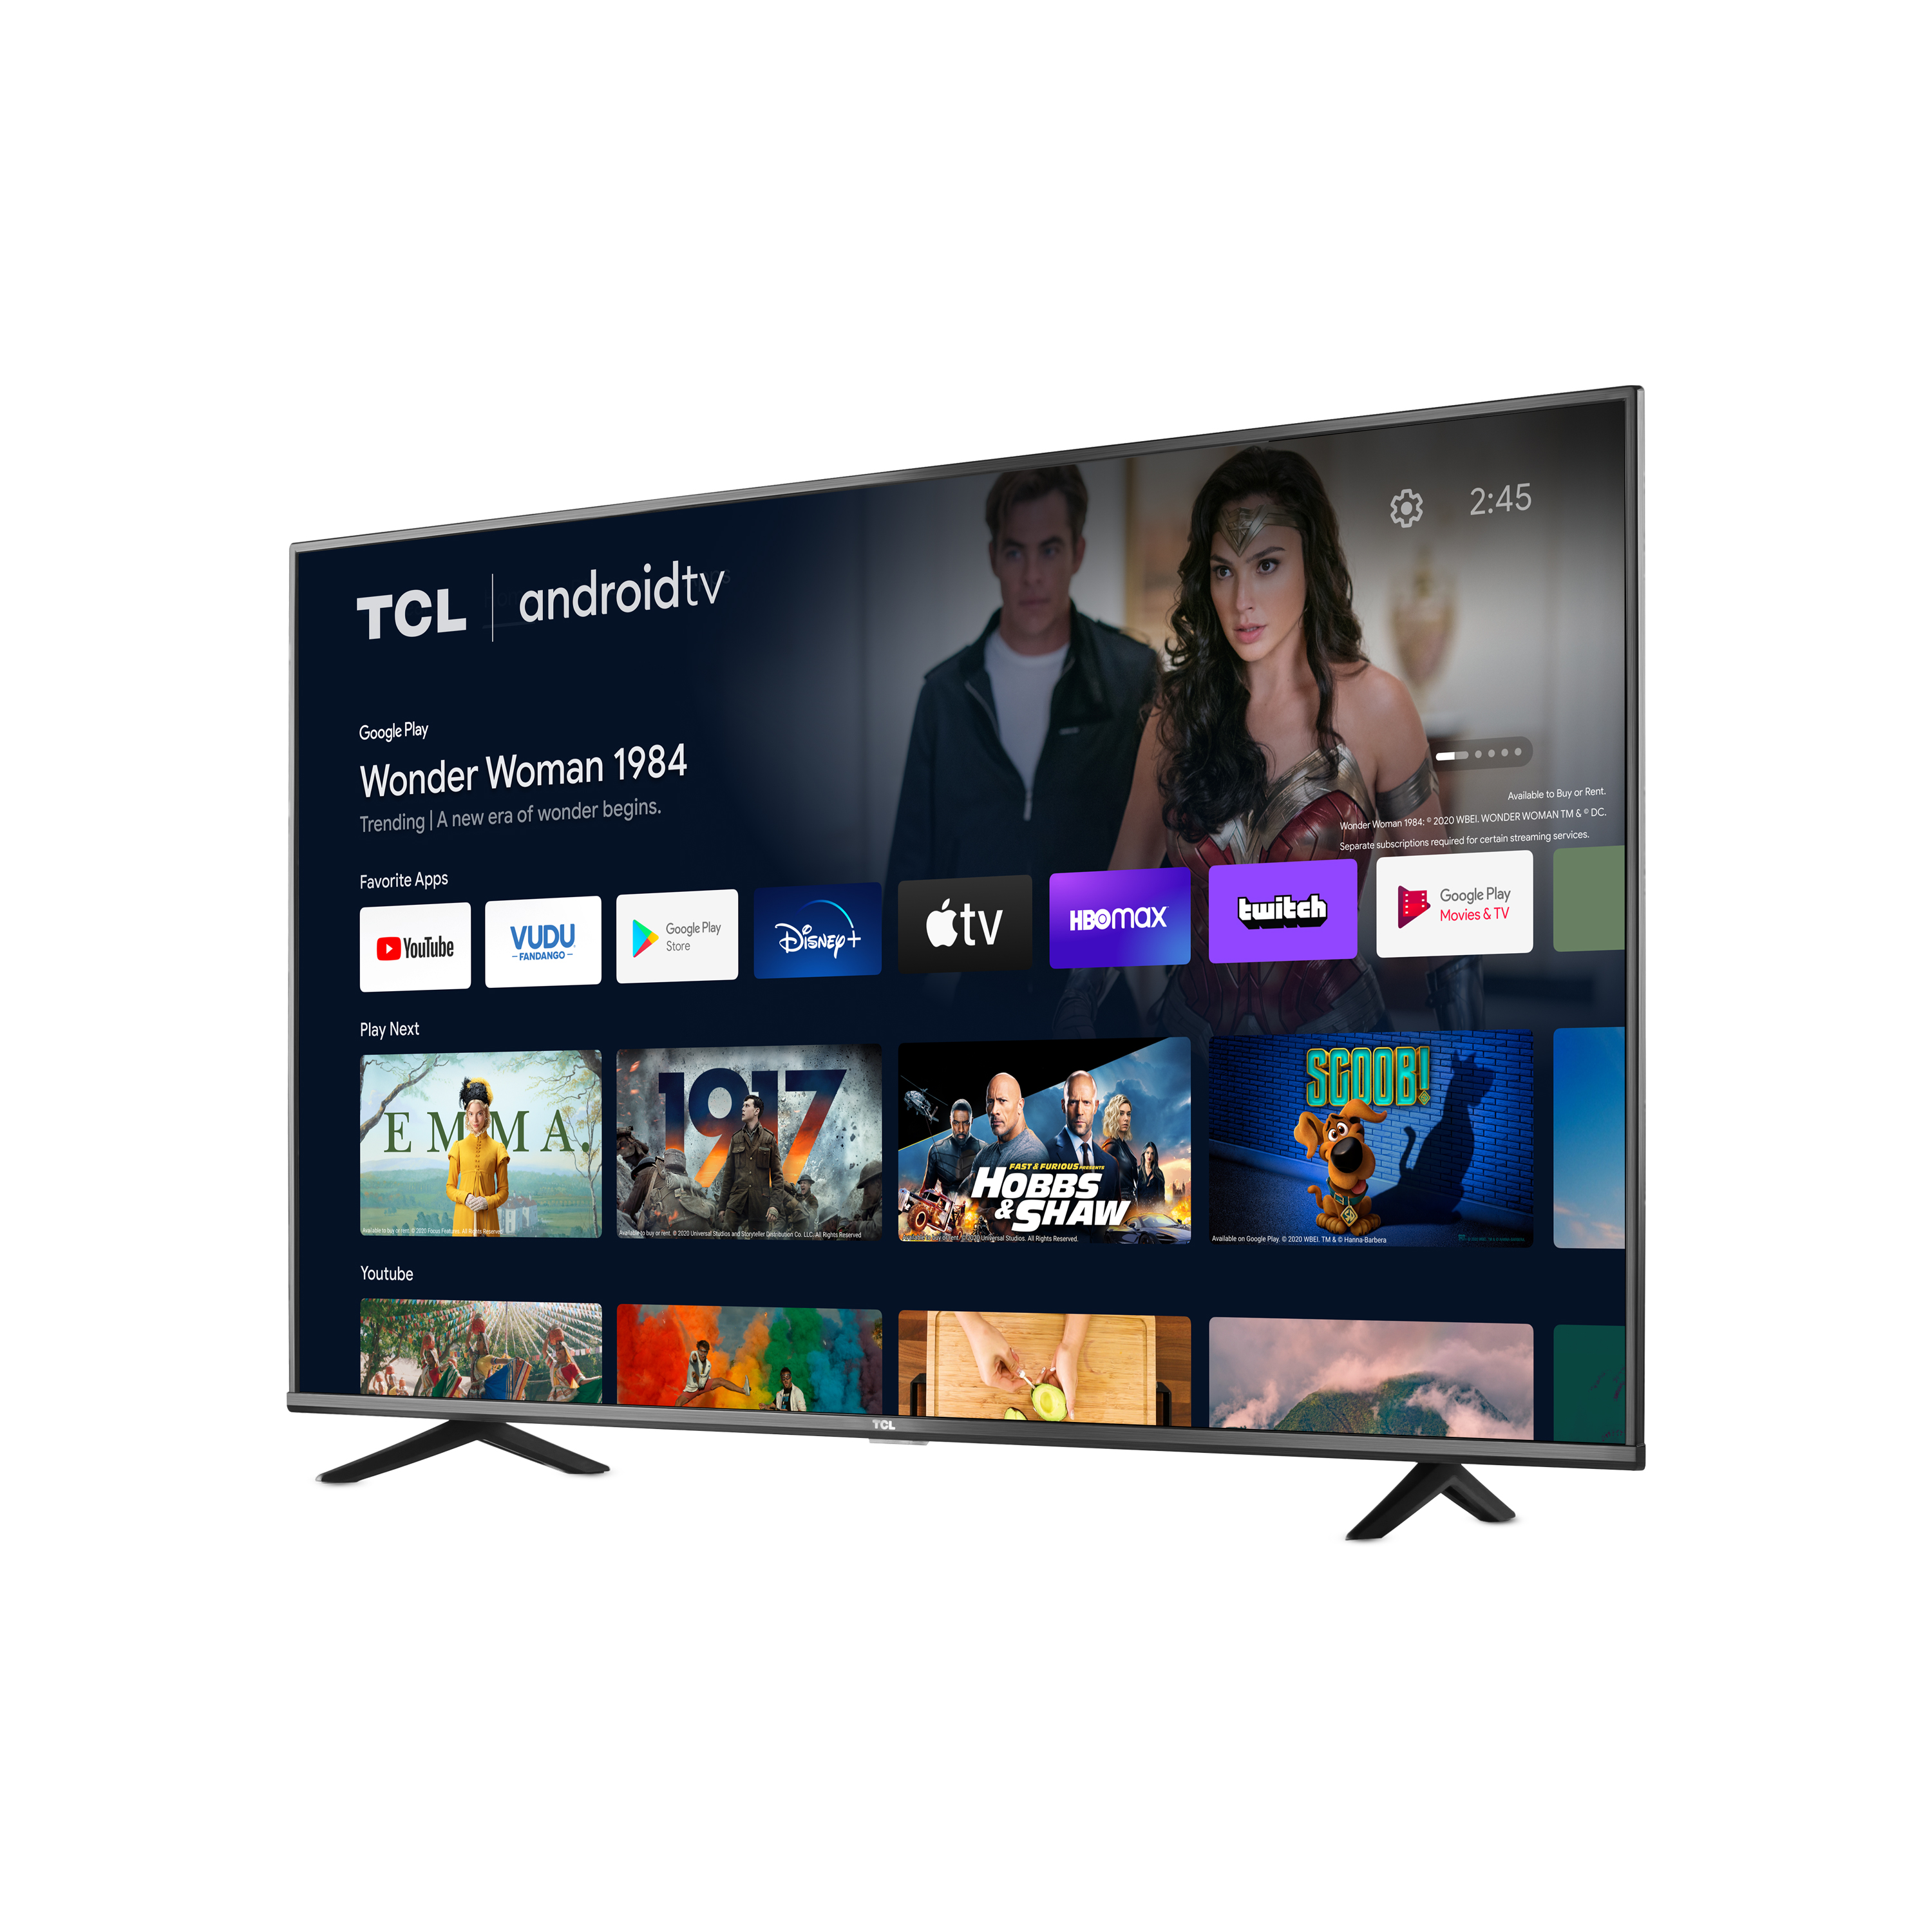 TCL 55" Class 4-Series 4K UHD HDR Smart Android TV - 55S434 - image 4 of 11